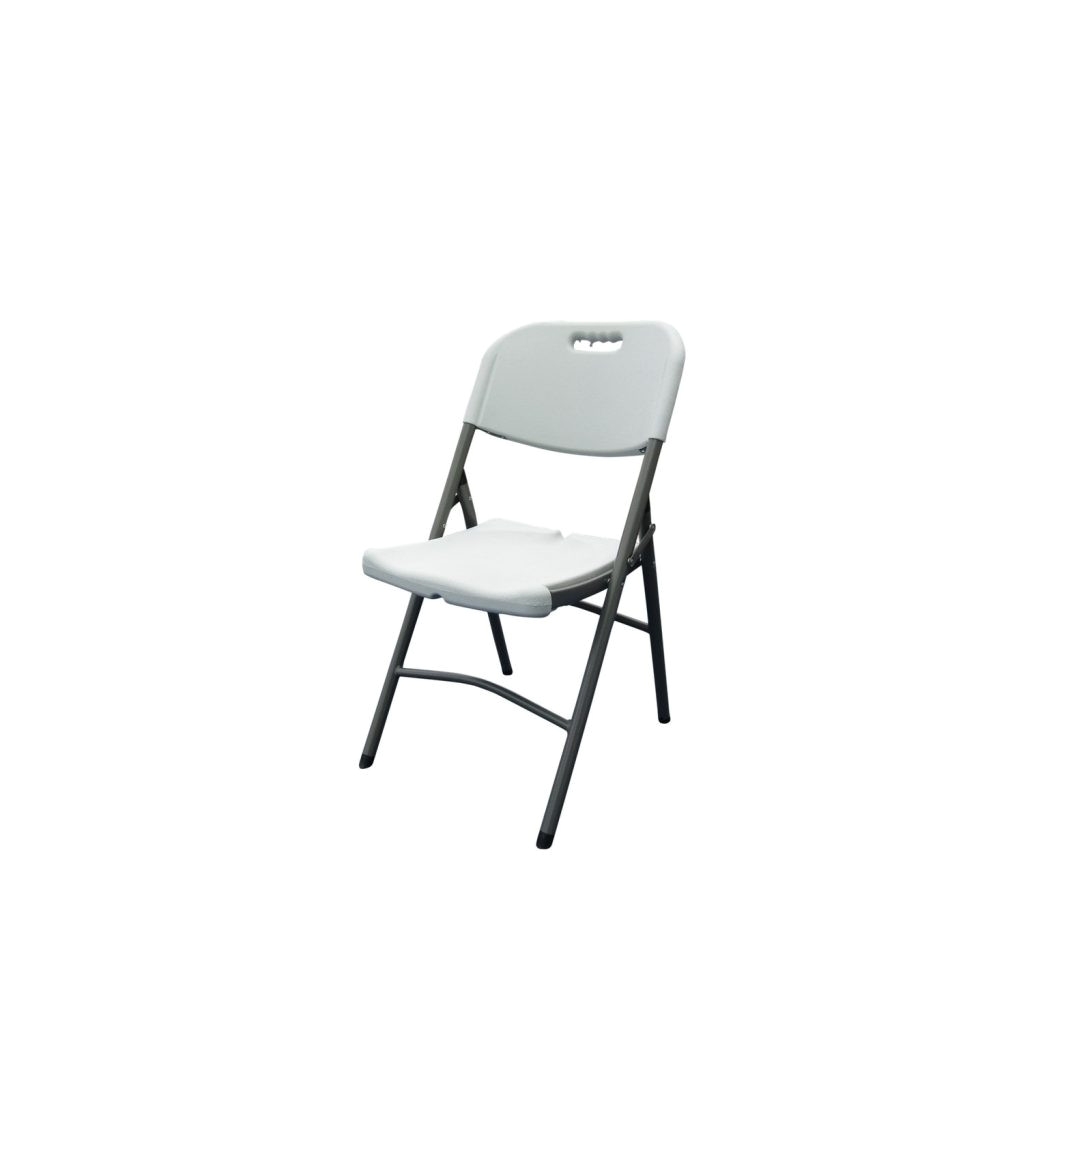 director chair with side table home design planning plus satisfying heavy duty camping chair nz folding